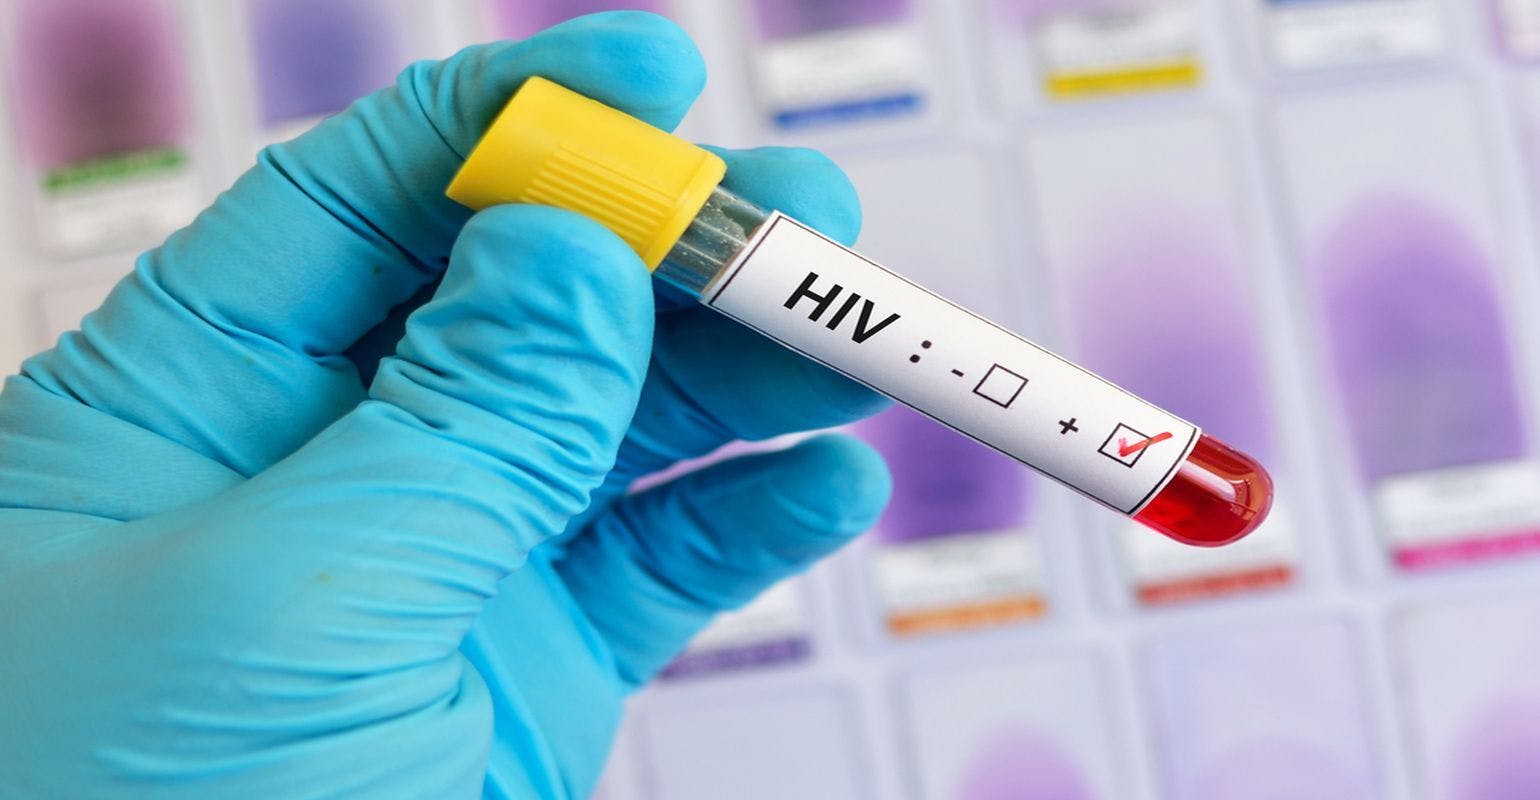 HIV Infections in U.S. Could be Reduced by Up to 67 Percent by 2030, Study Finds